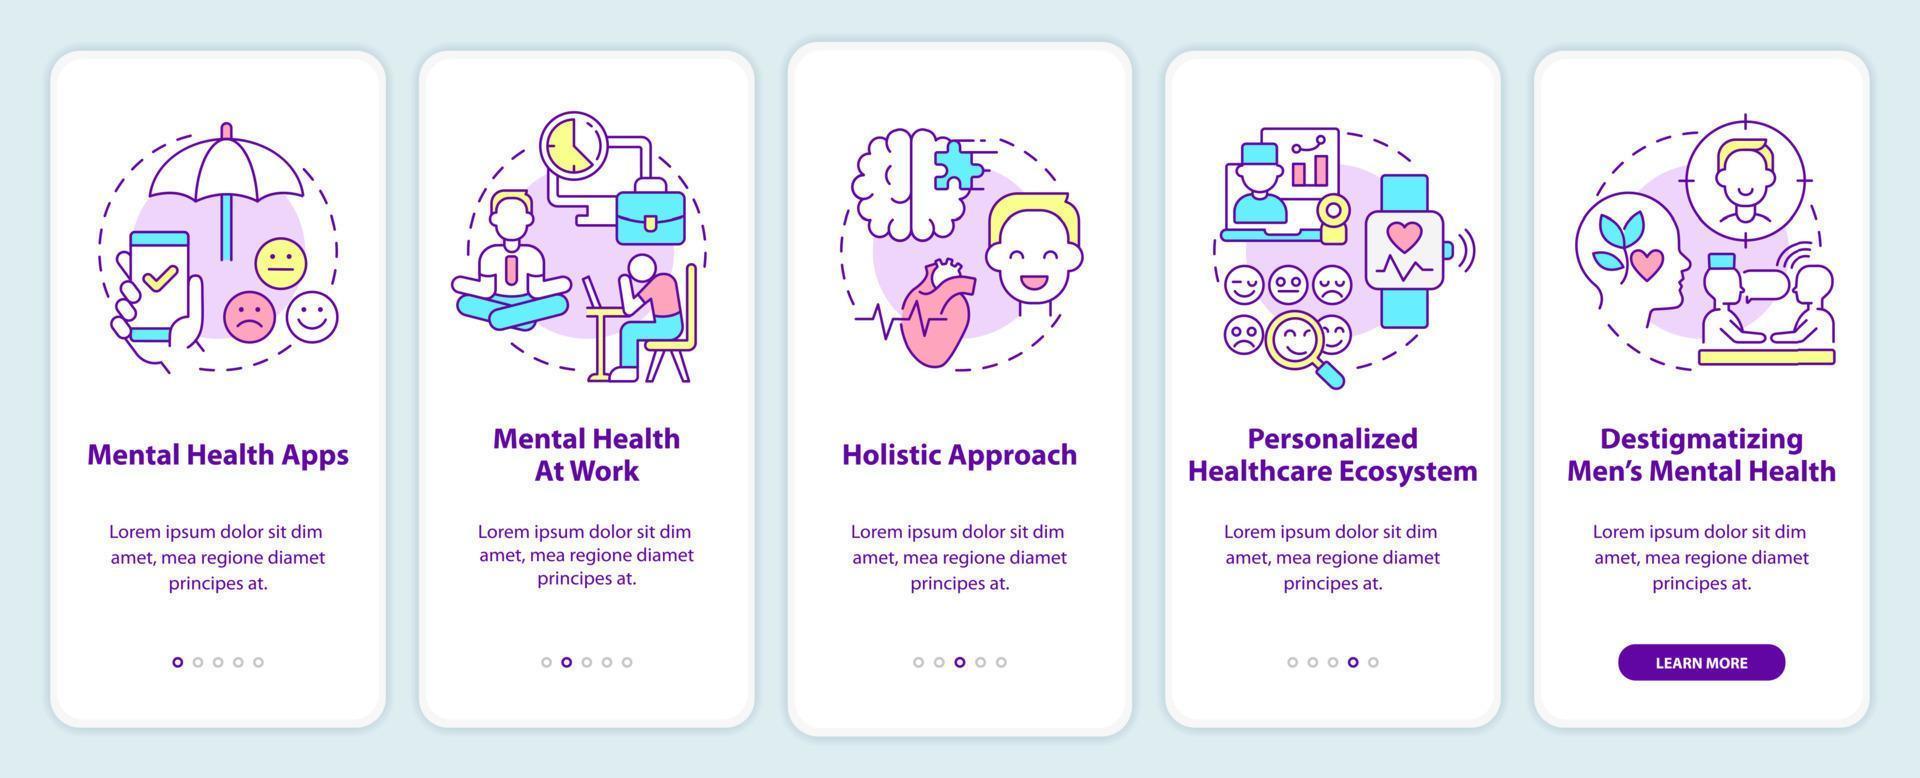 Mental health improving trends onboarding mobile app screen. Therapy walkthrough 5 steps graphic instructions pages with linear concepts. UI, UX, GUI template. vector